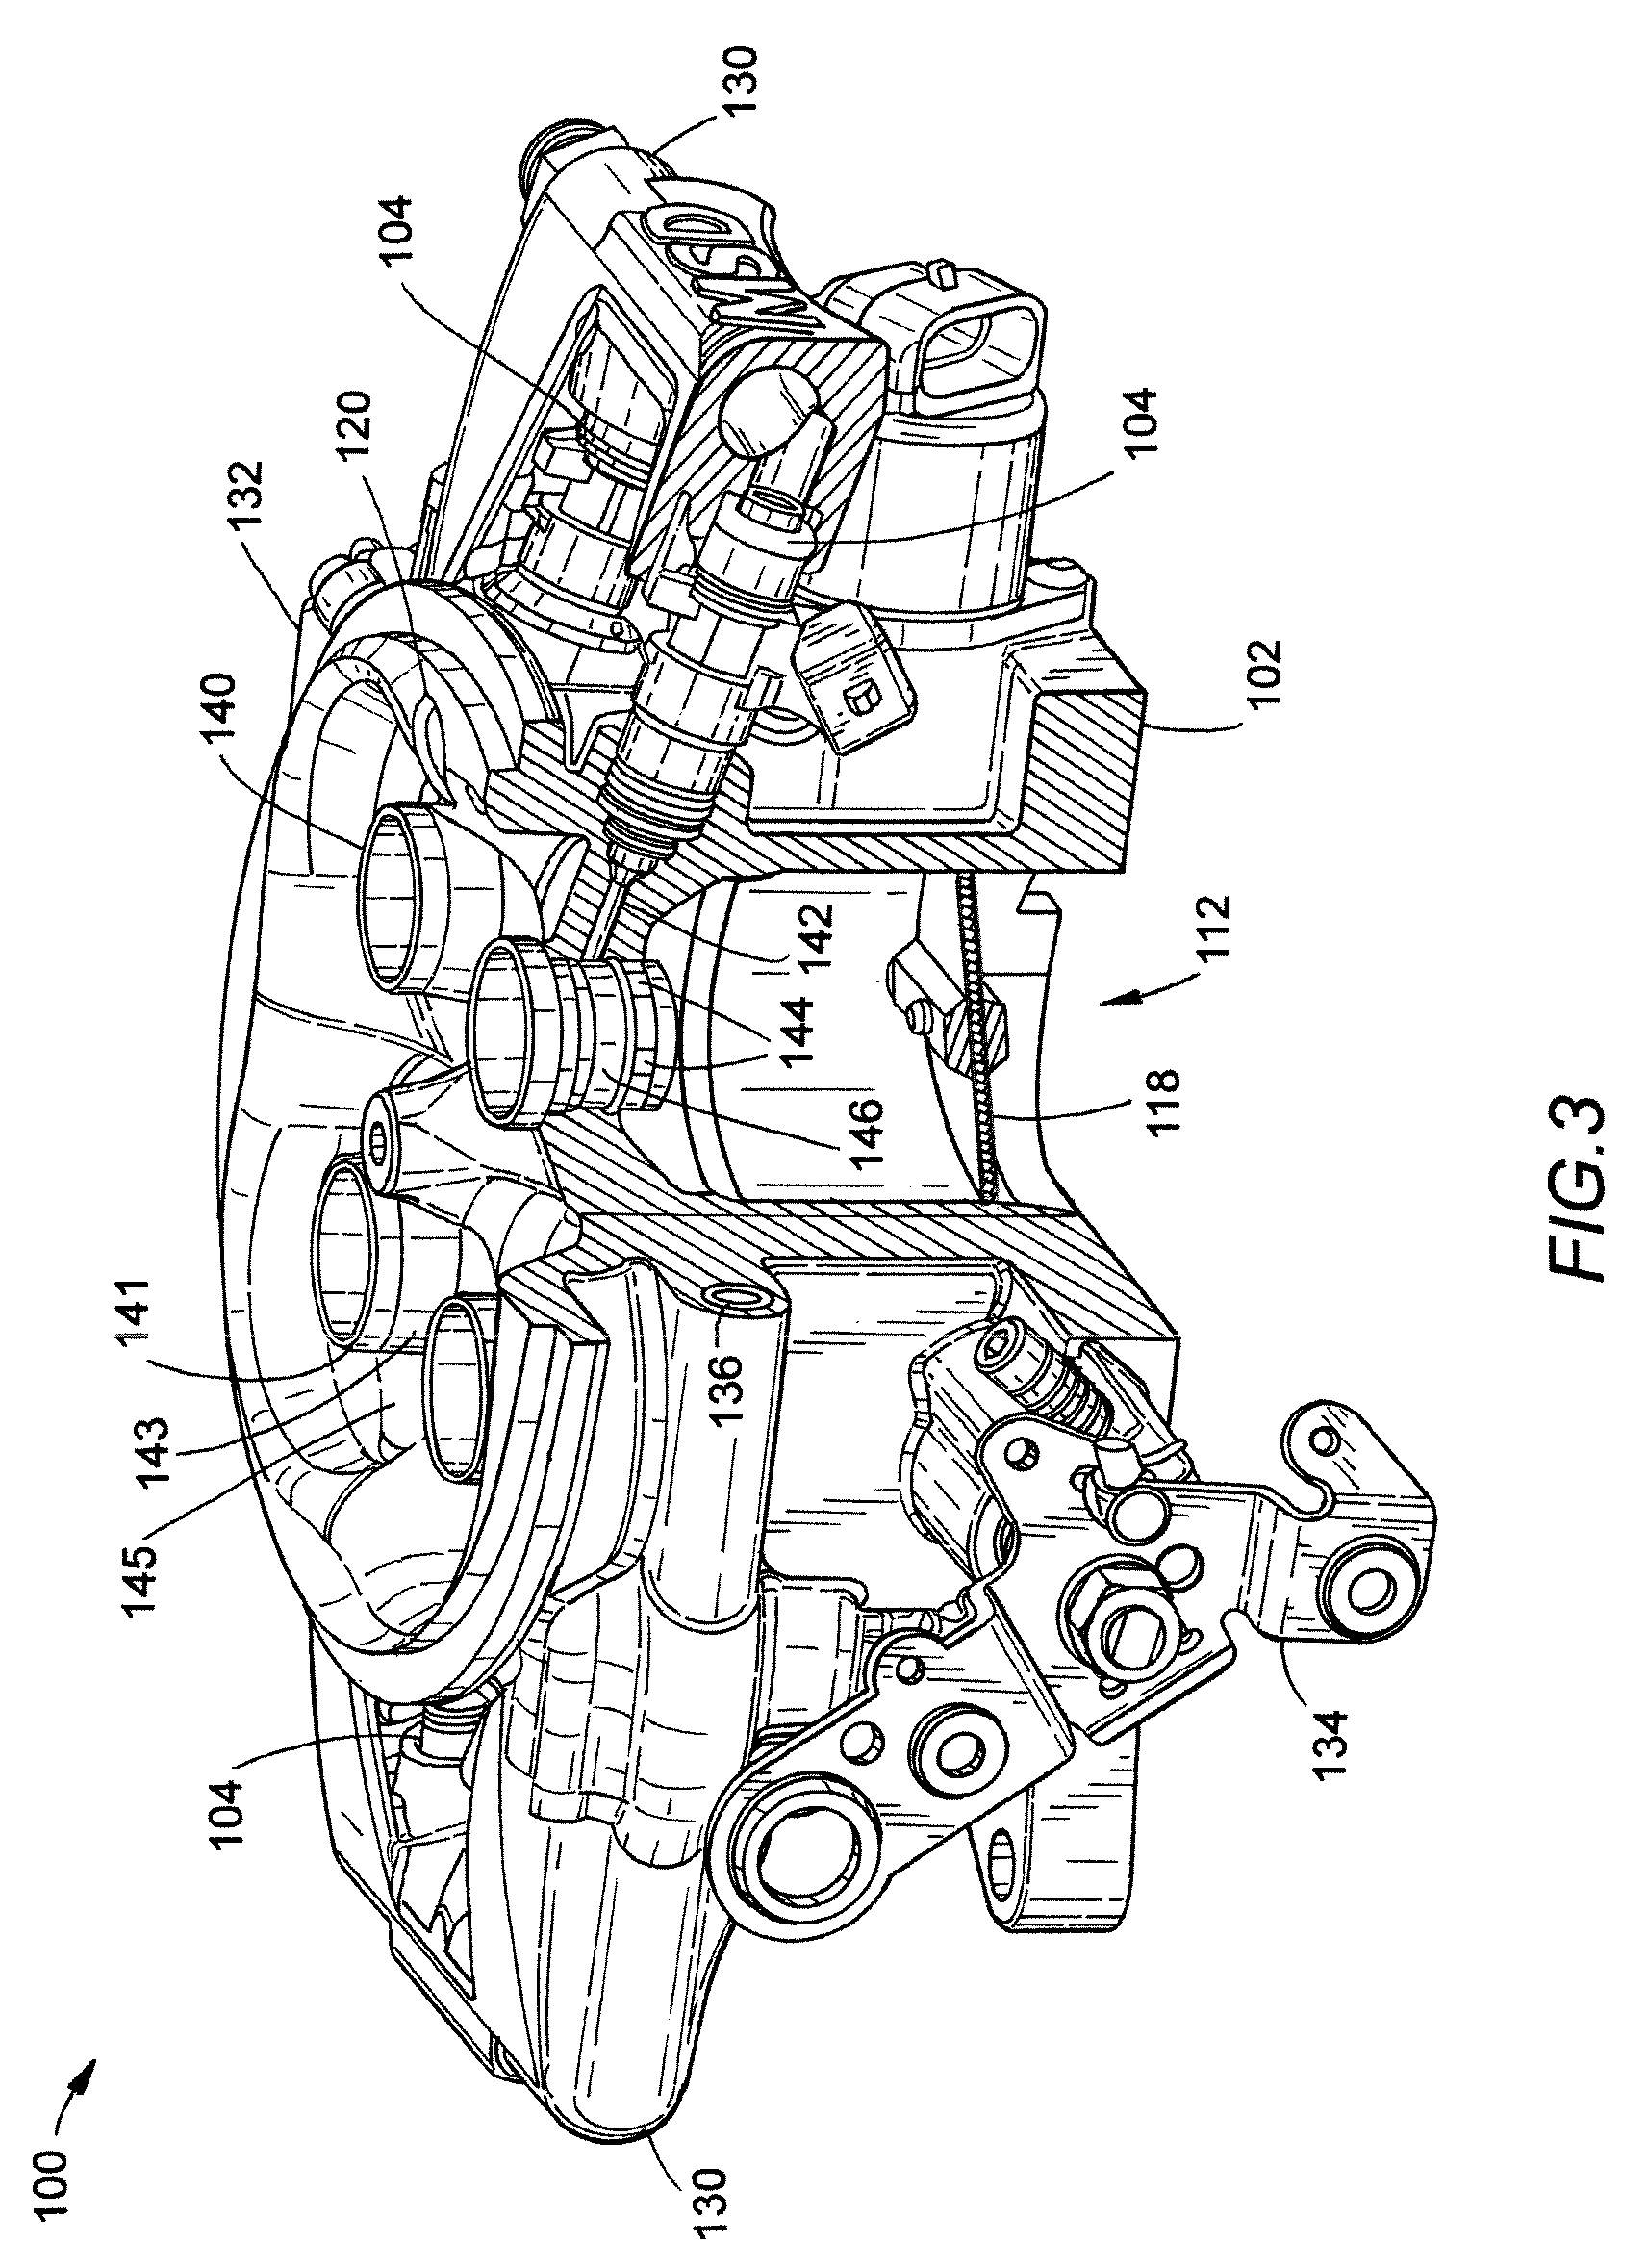 Throttle body fuel injection system with improved idle air control